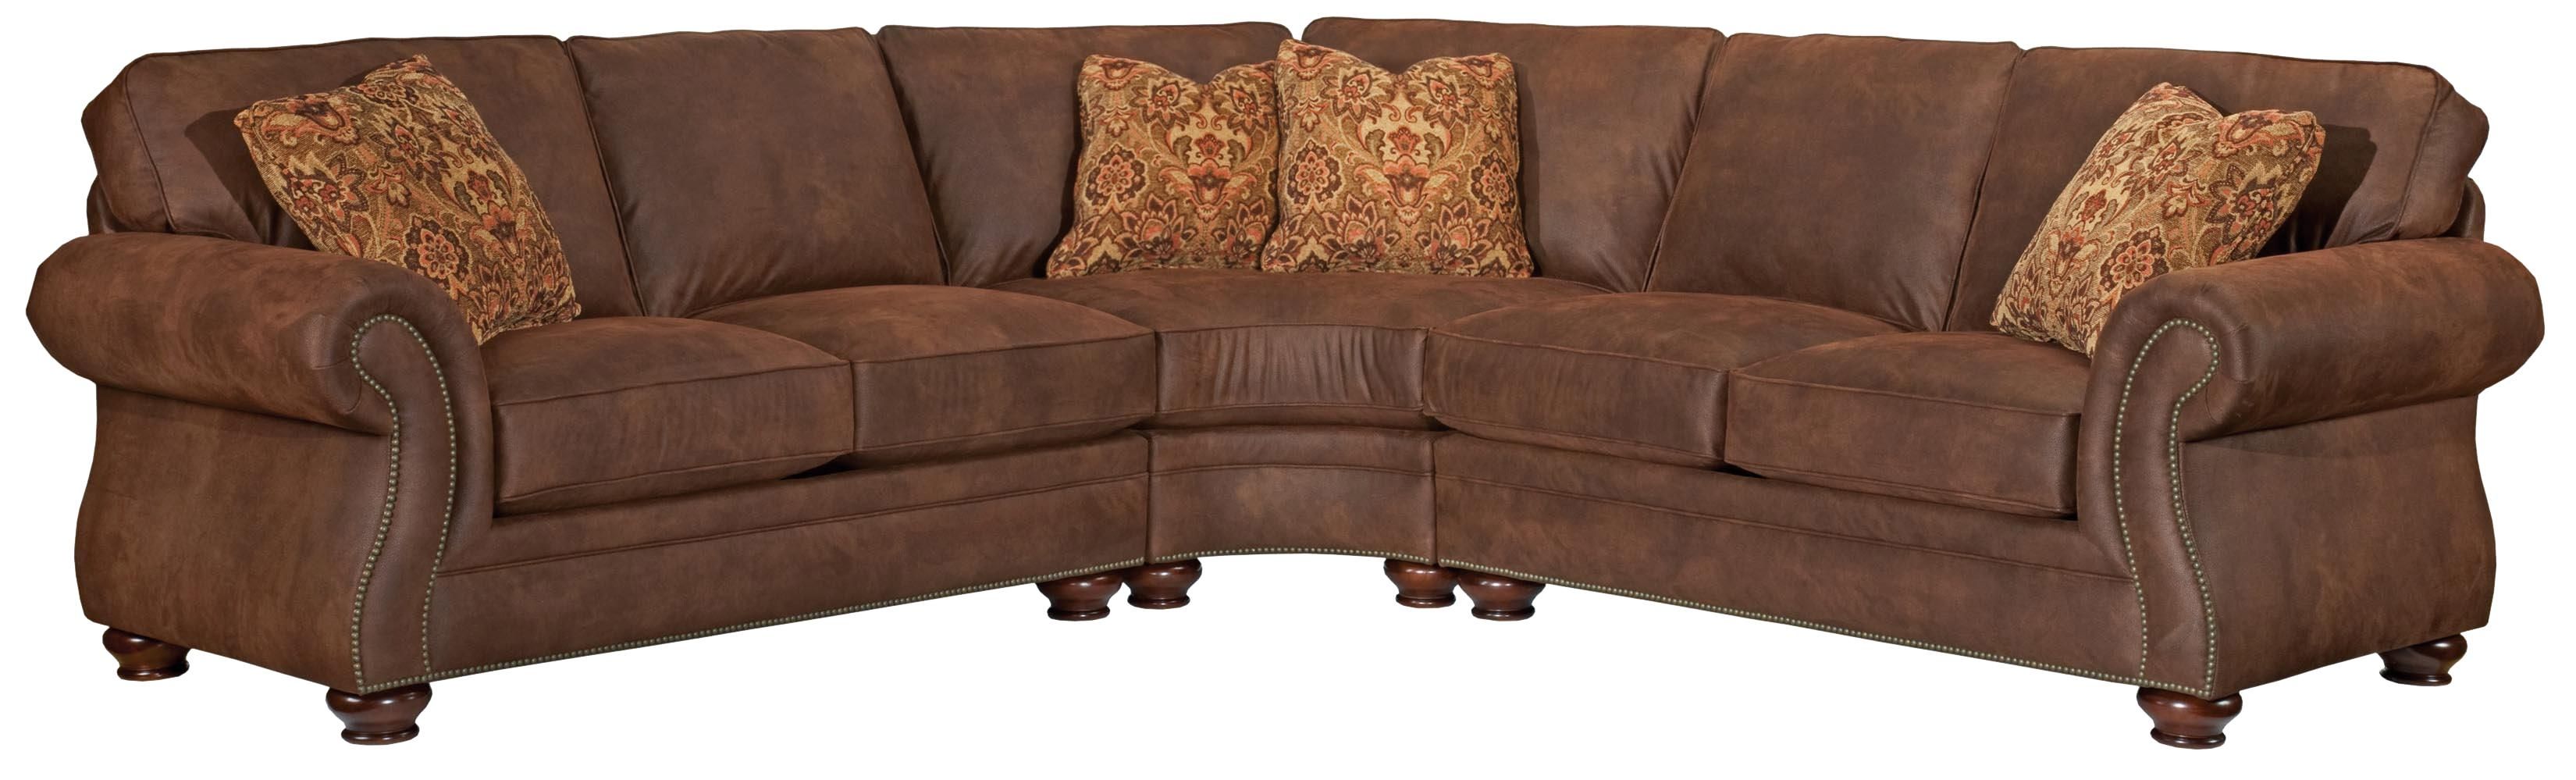 Featured Photo of Broyhill Sectional Sofas